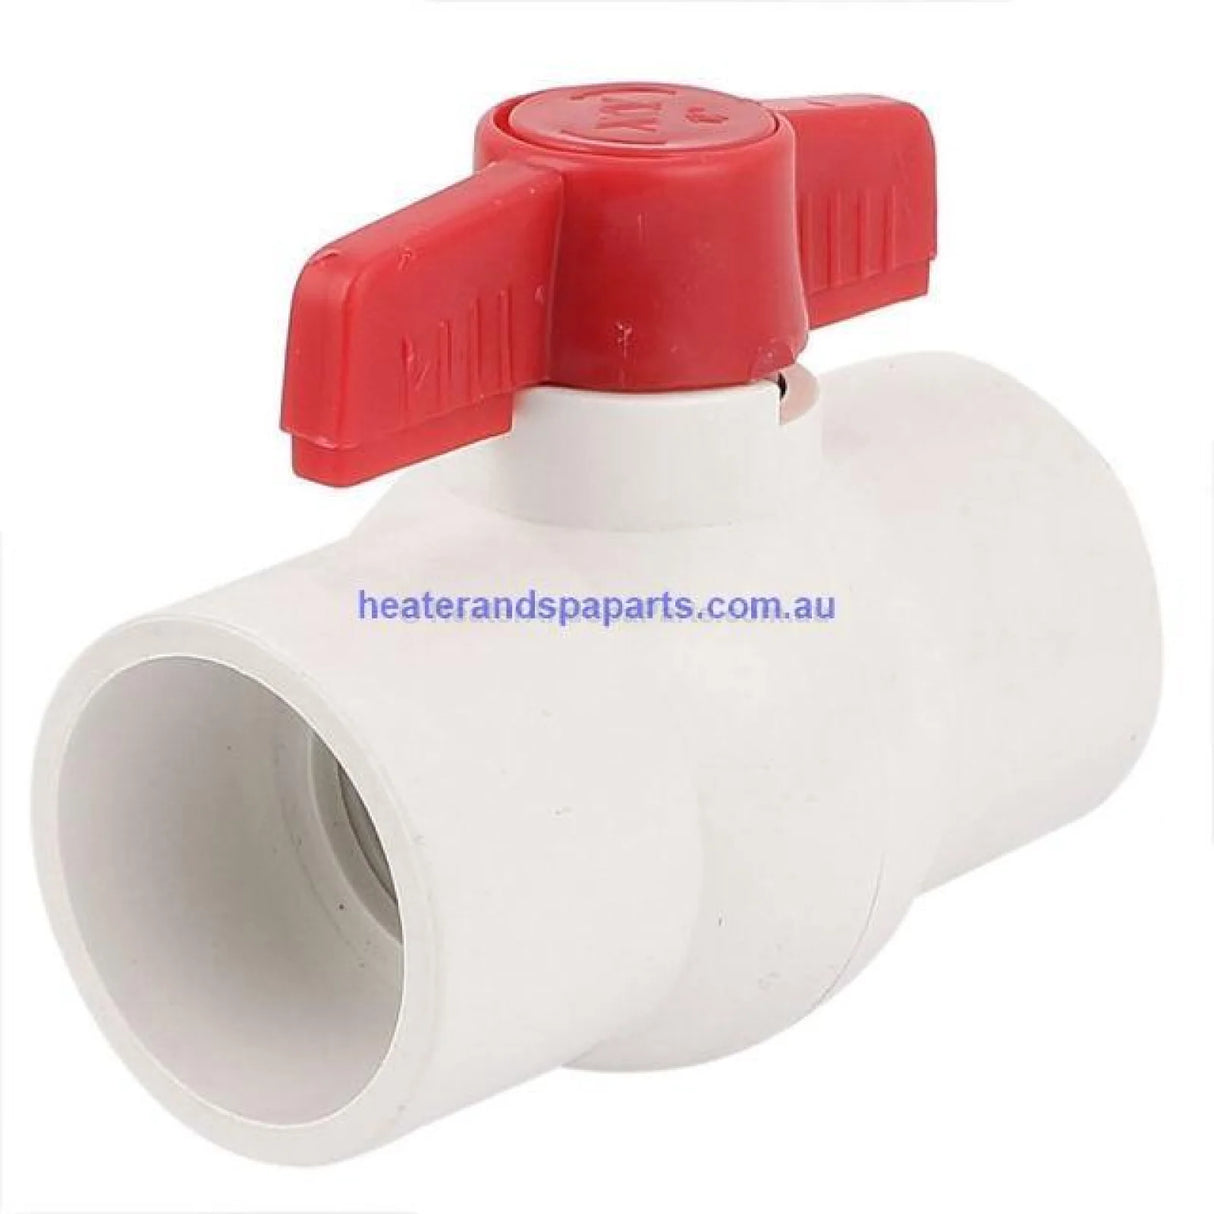 PVC Ball Valve - Red & Blue Handle - Budget Water Valves - NLA - Heater and Spa Parts